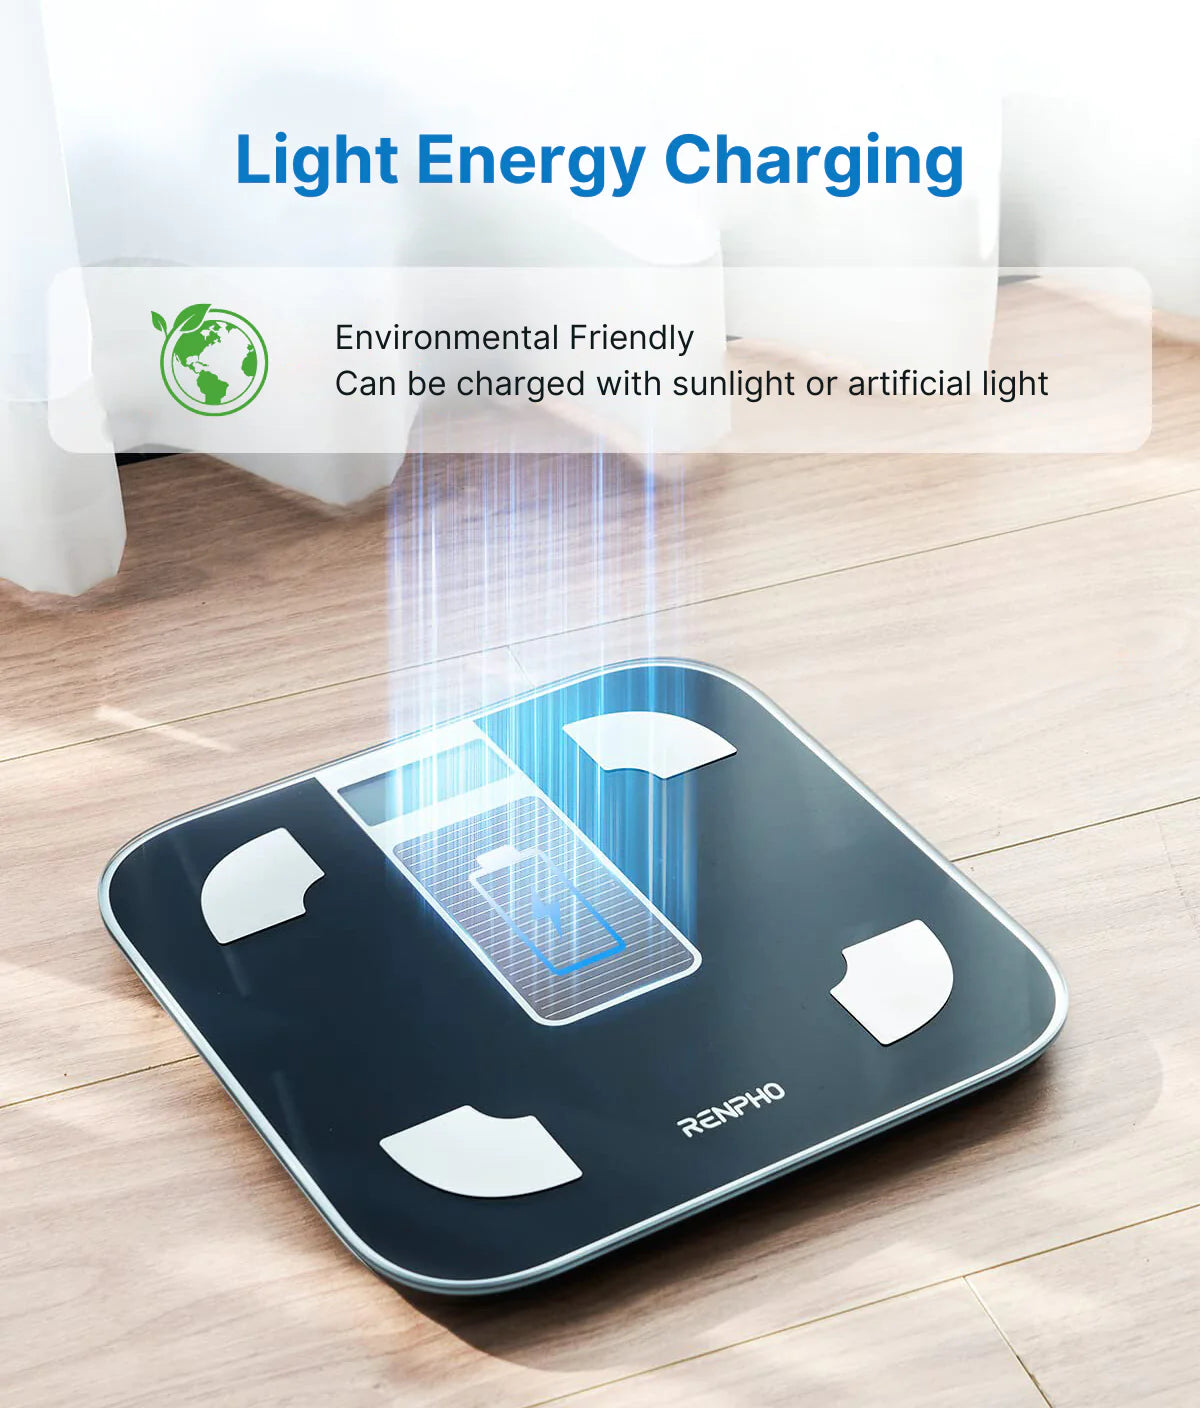 An image of a sleek, modern Elis Solar Smart Body Scale by Renpho EU on a wooden floor illuminated by sunlight, featuring a graphic overlay of a glowing blue light to represent its light energy charging capability. The text highlights its